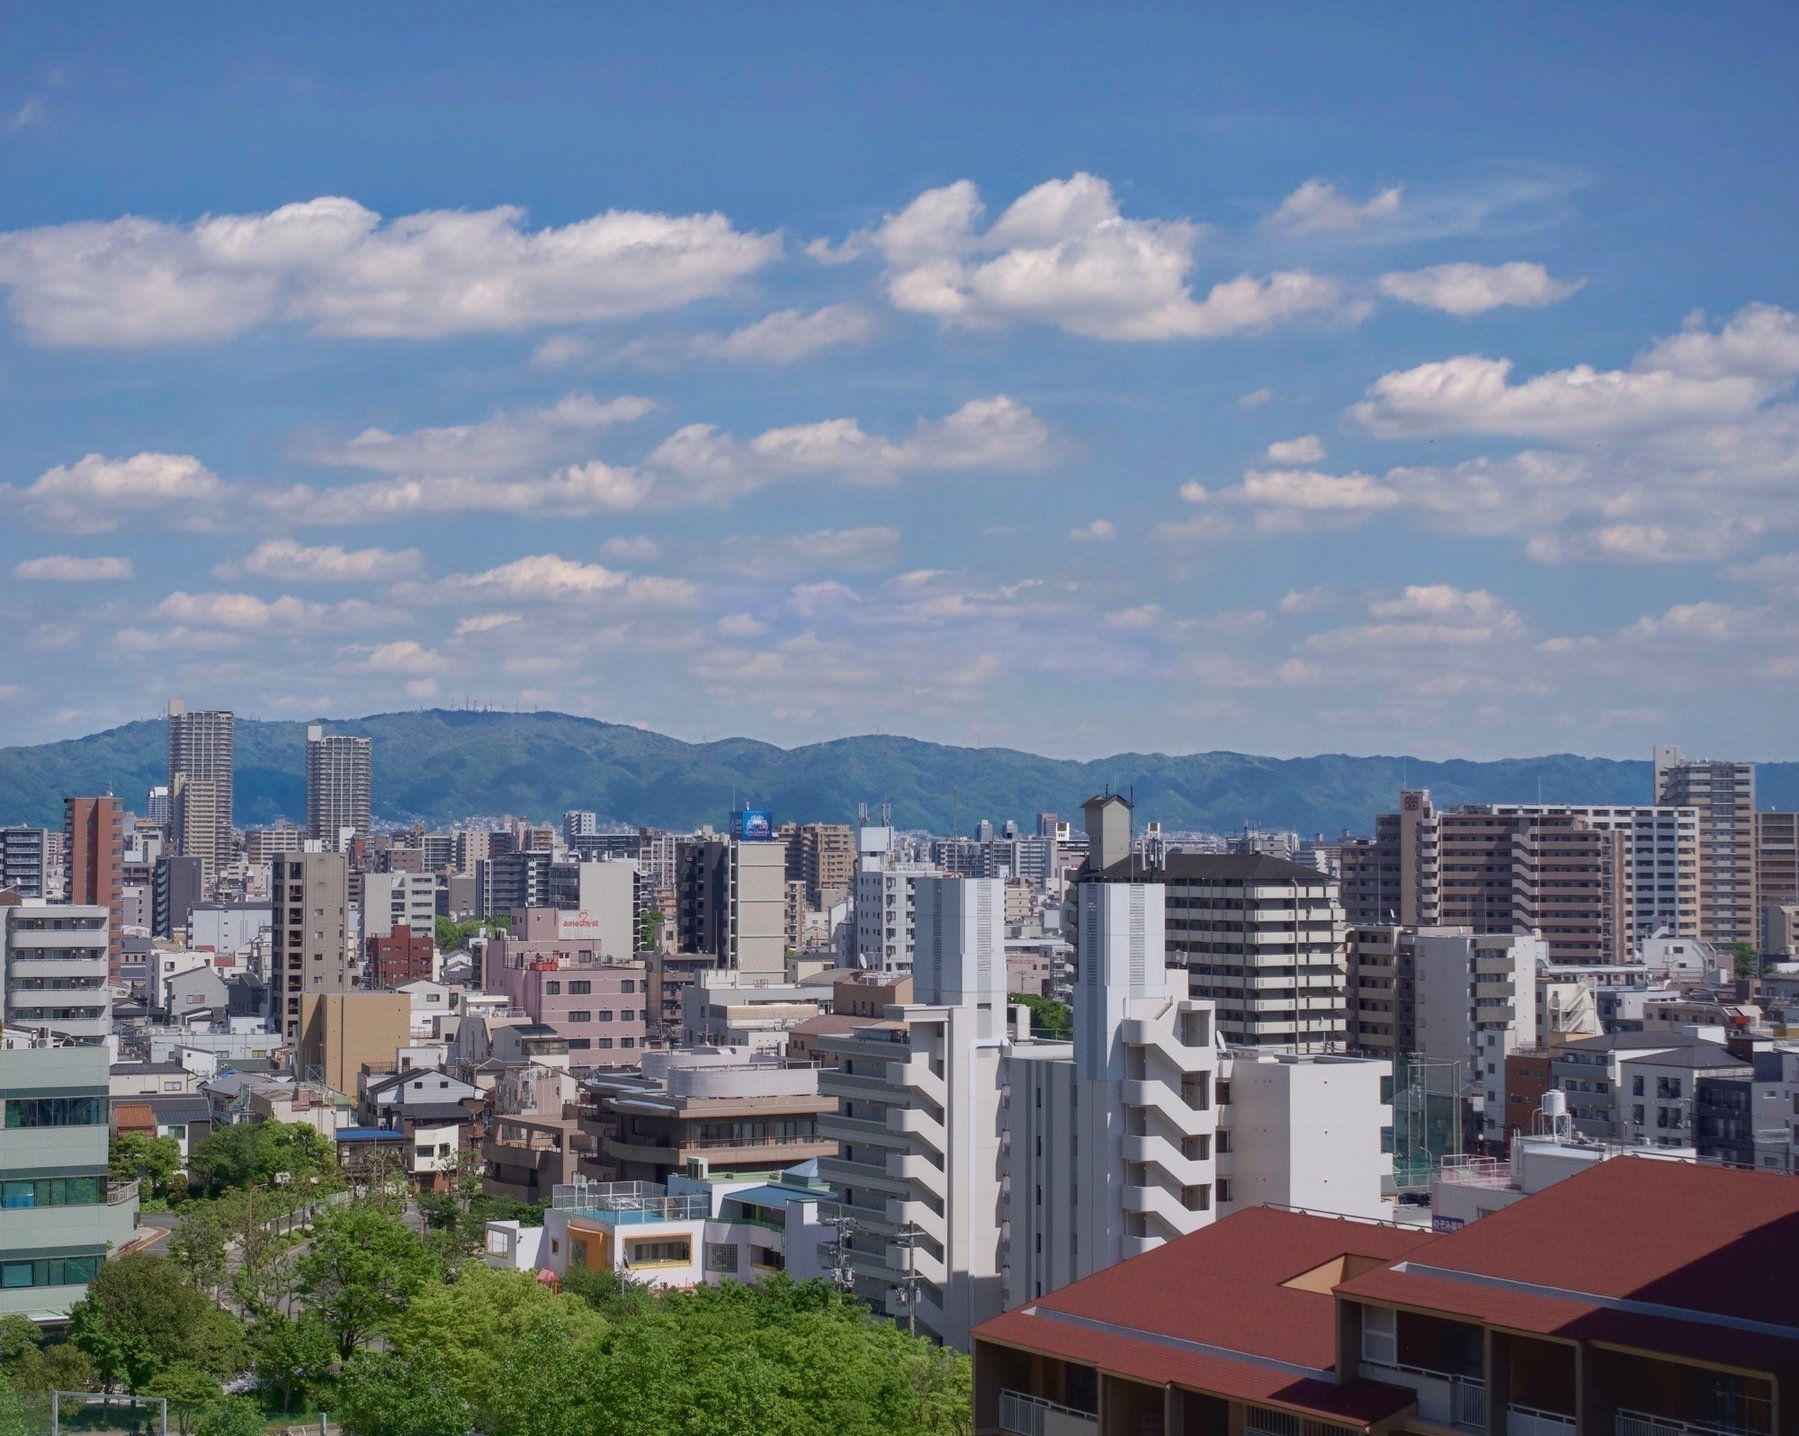 Landscape photo on a sunny day with clouds of buildings receding into the distance and a mountain range beyond